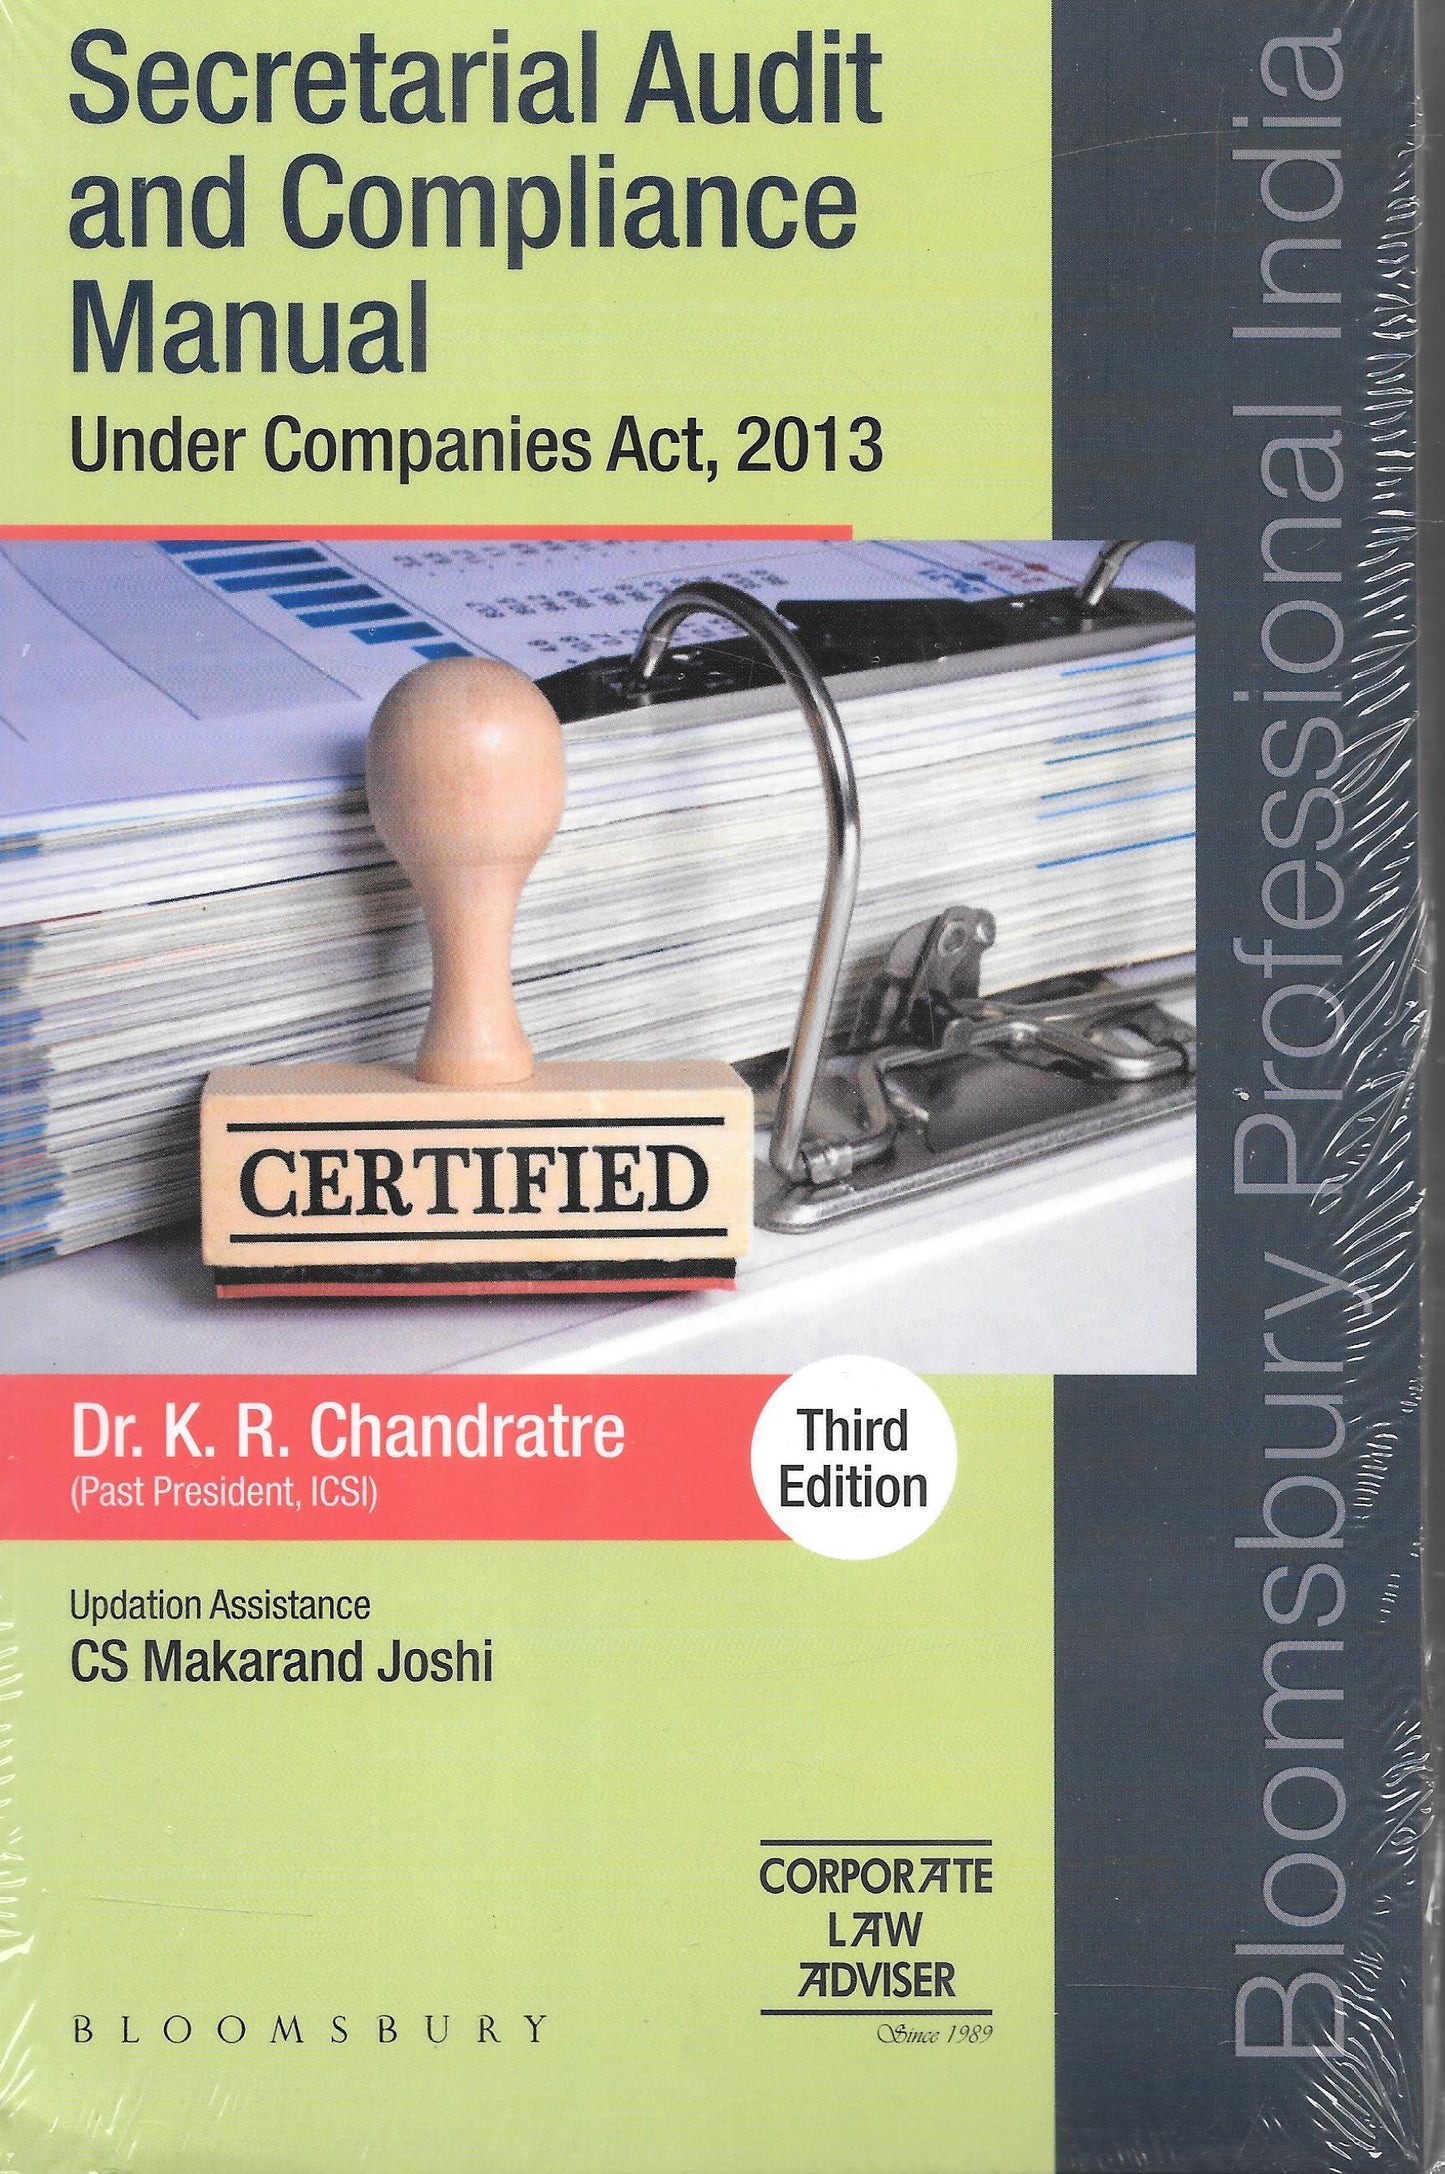 Secretarial Audit and Compliance Under Companies Act, 2013 - M&J Services